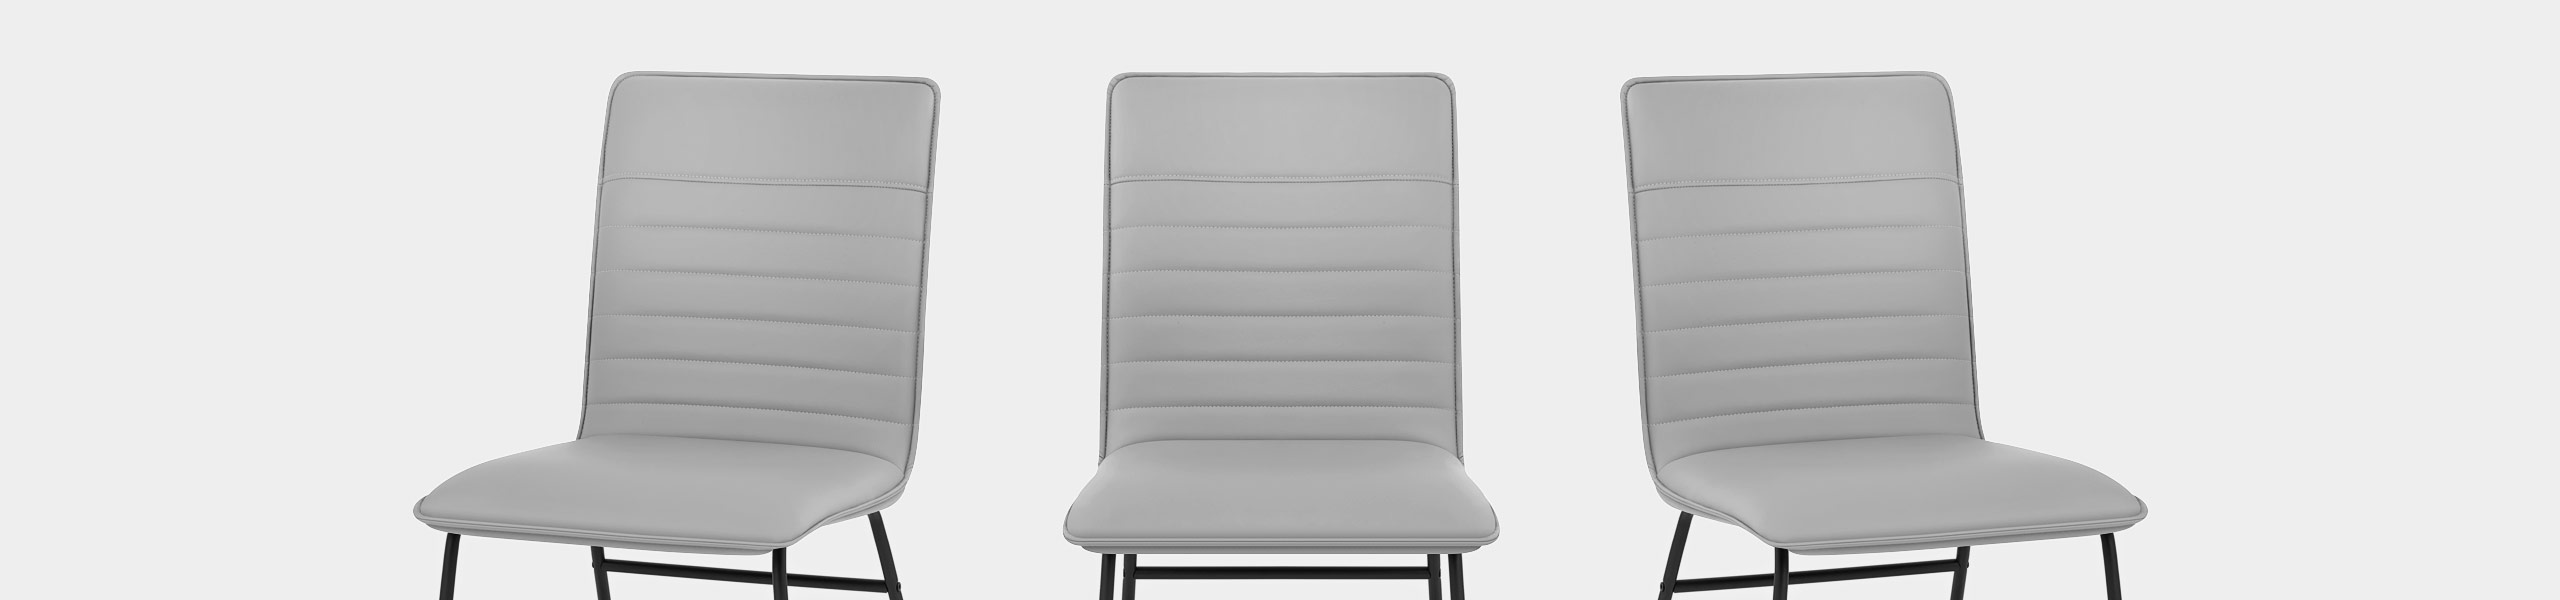 Chevelle Dining Chair Grey Leather Video Banner